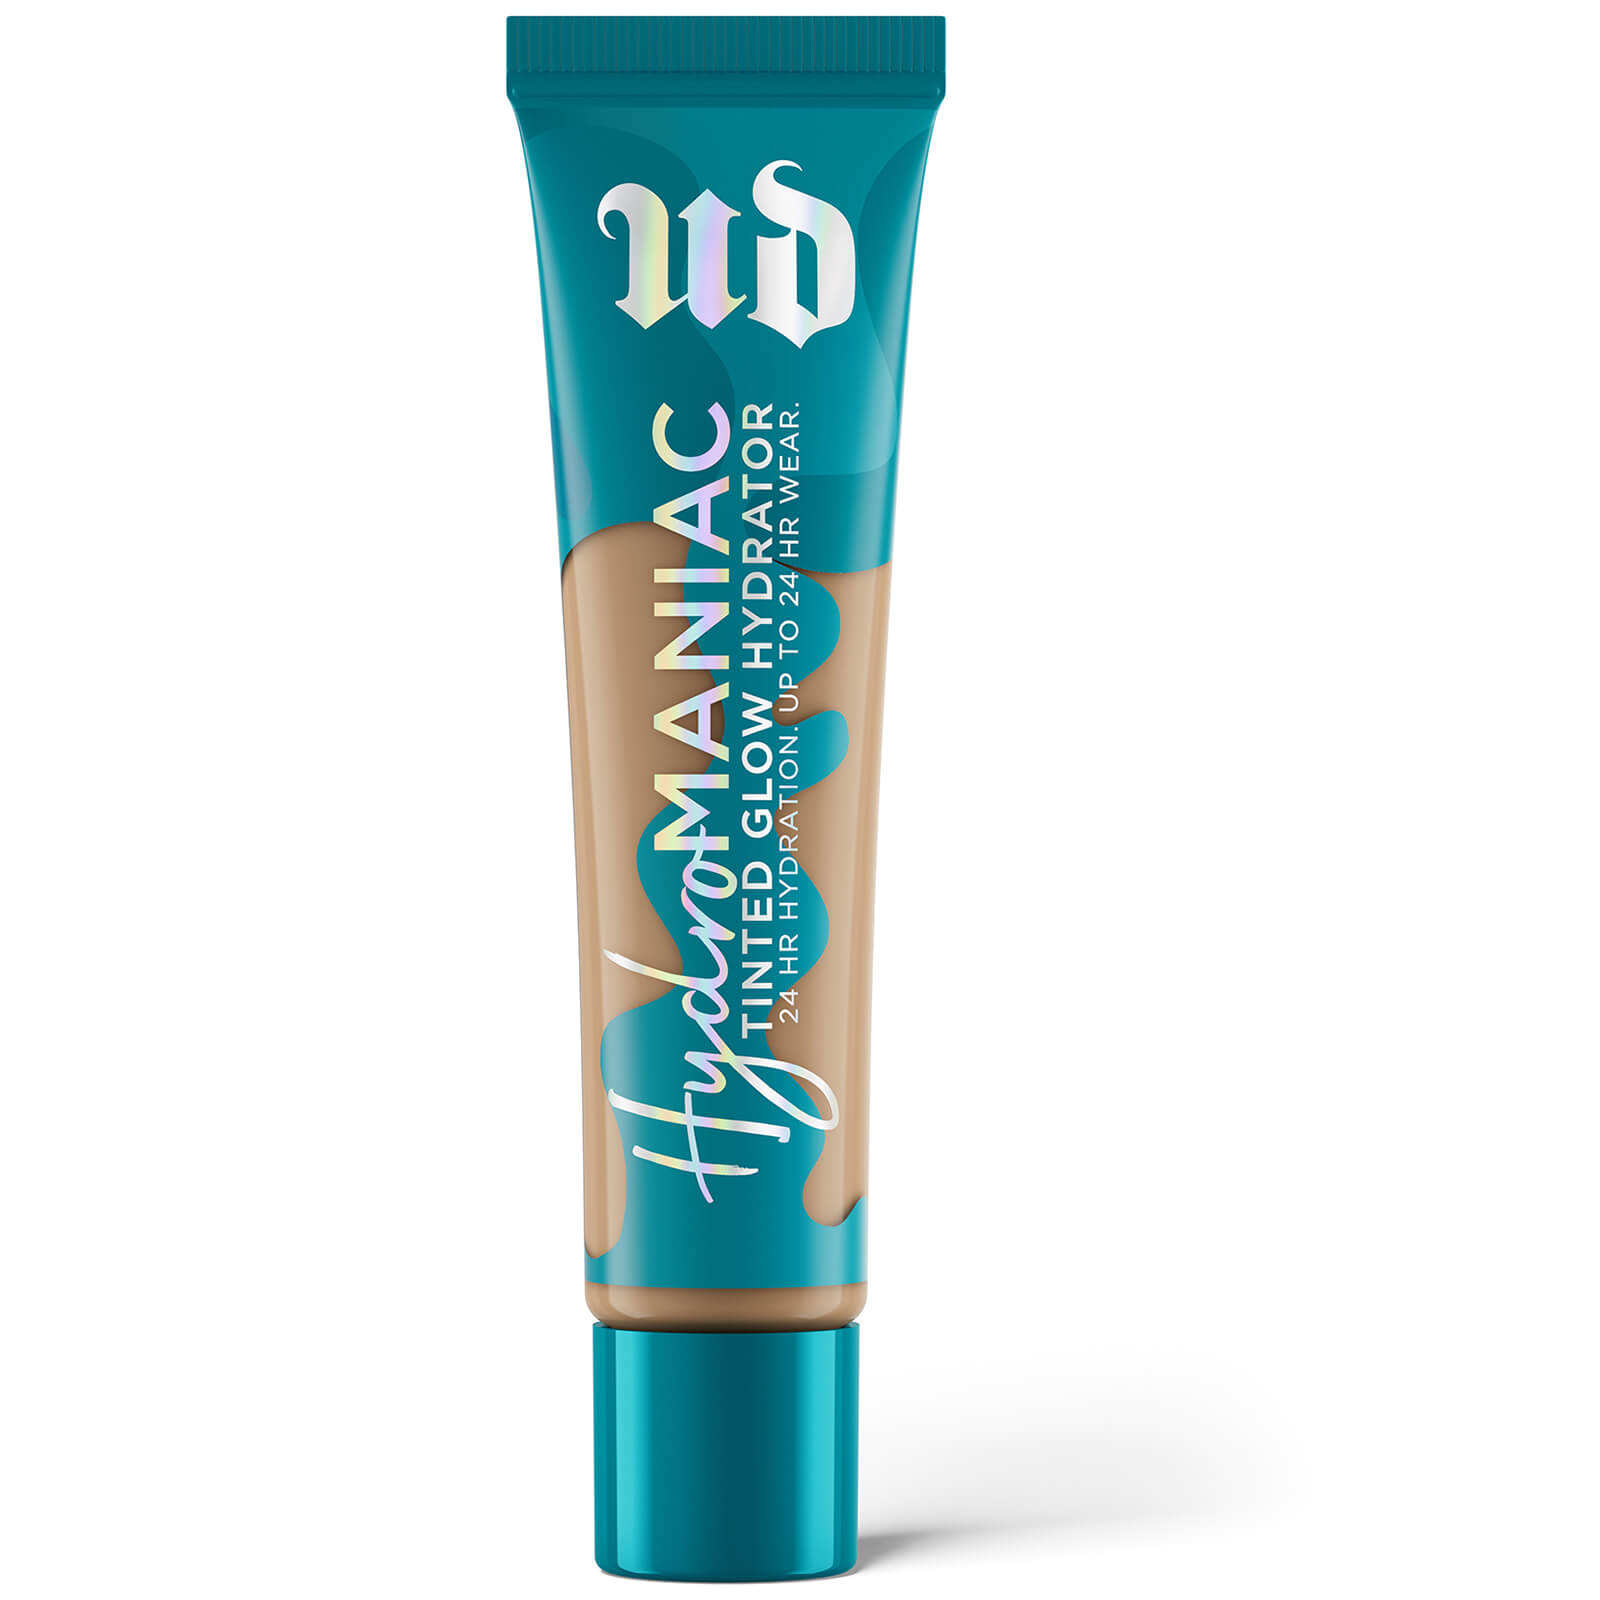 Image of Urban Decay Stay Naked Hydromaniac Tinted Glow Hydrator 35ml (Various Shades) - 31